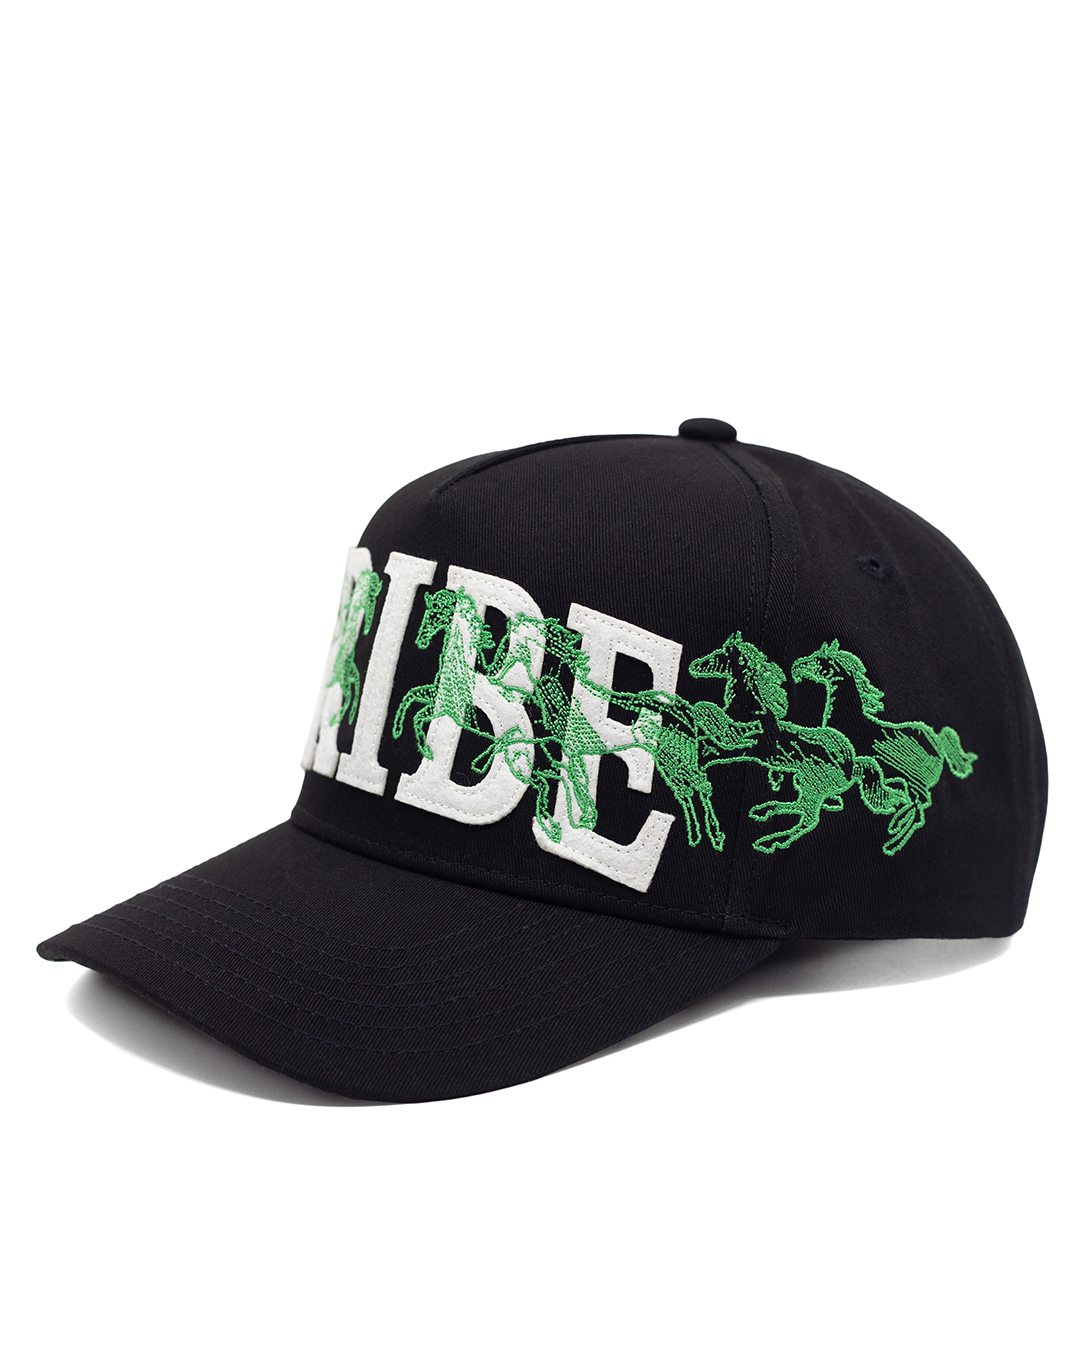 Triibe HAT OS "TRIBE" Champion Horses Hat — Black lime